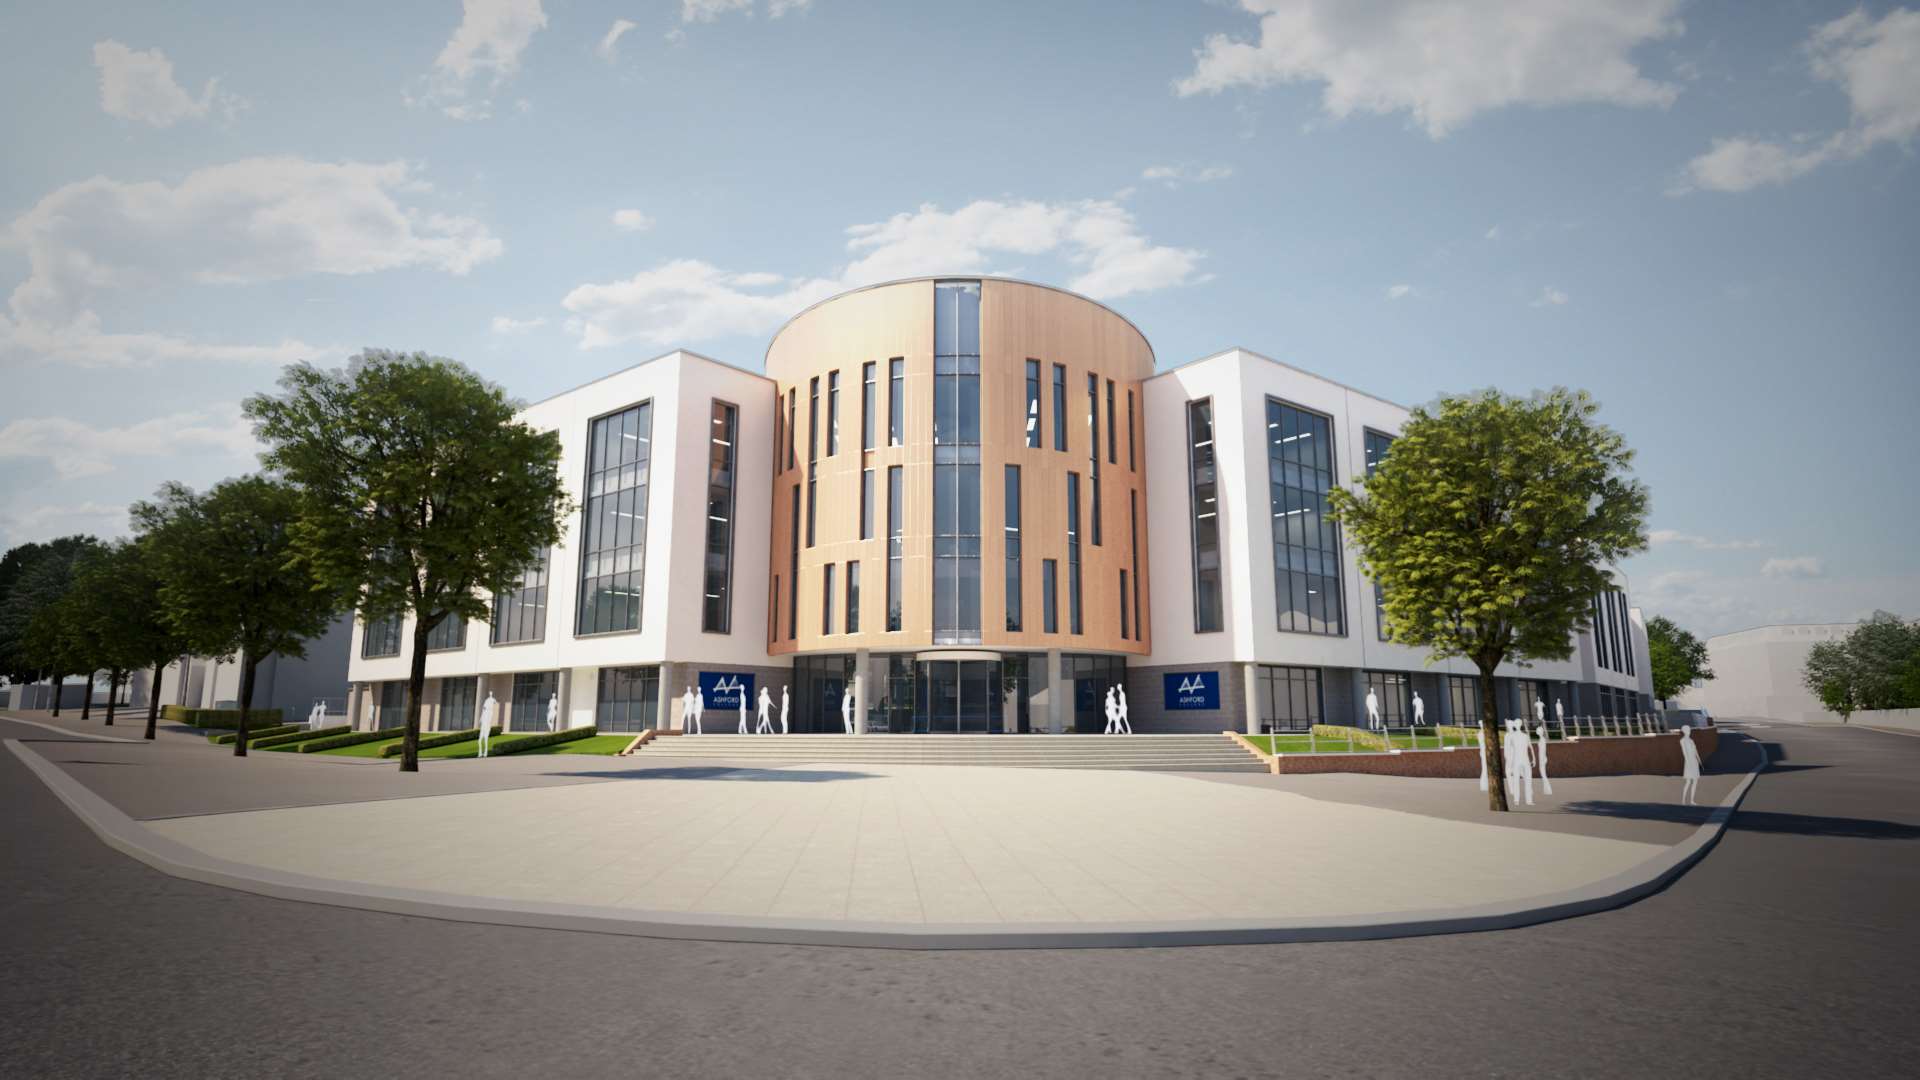 An artist's impression of what the main entrance to the new Ashford College will look like